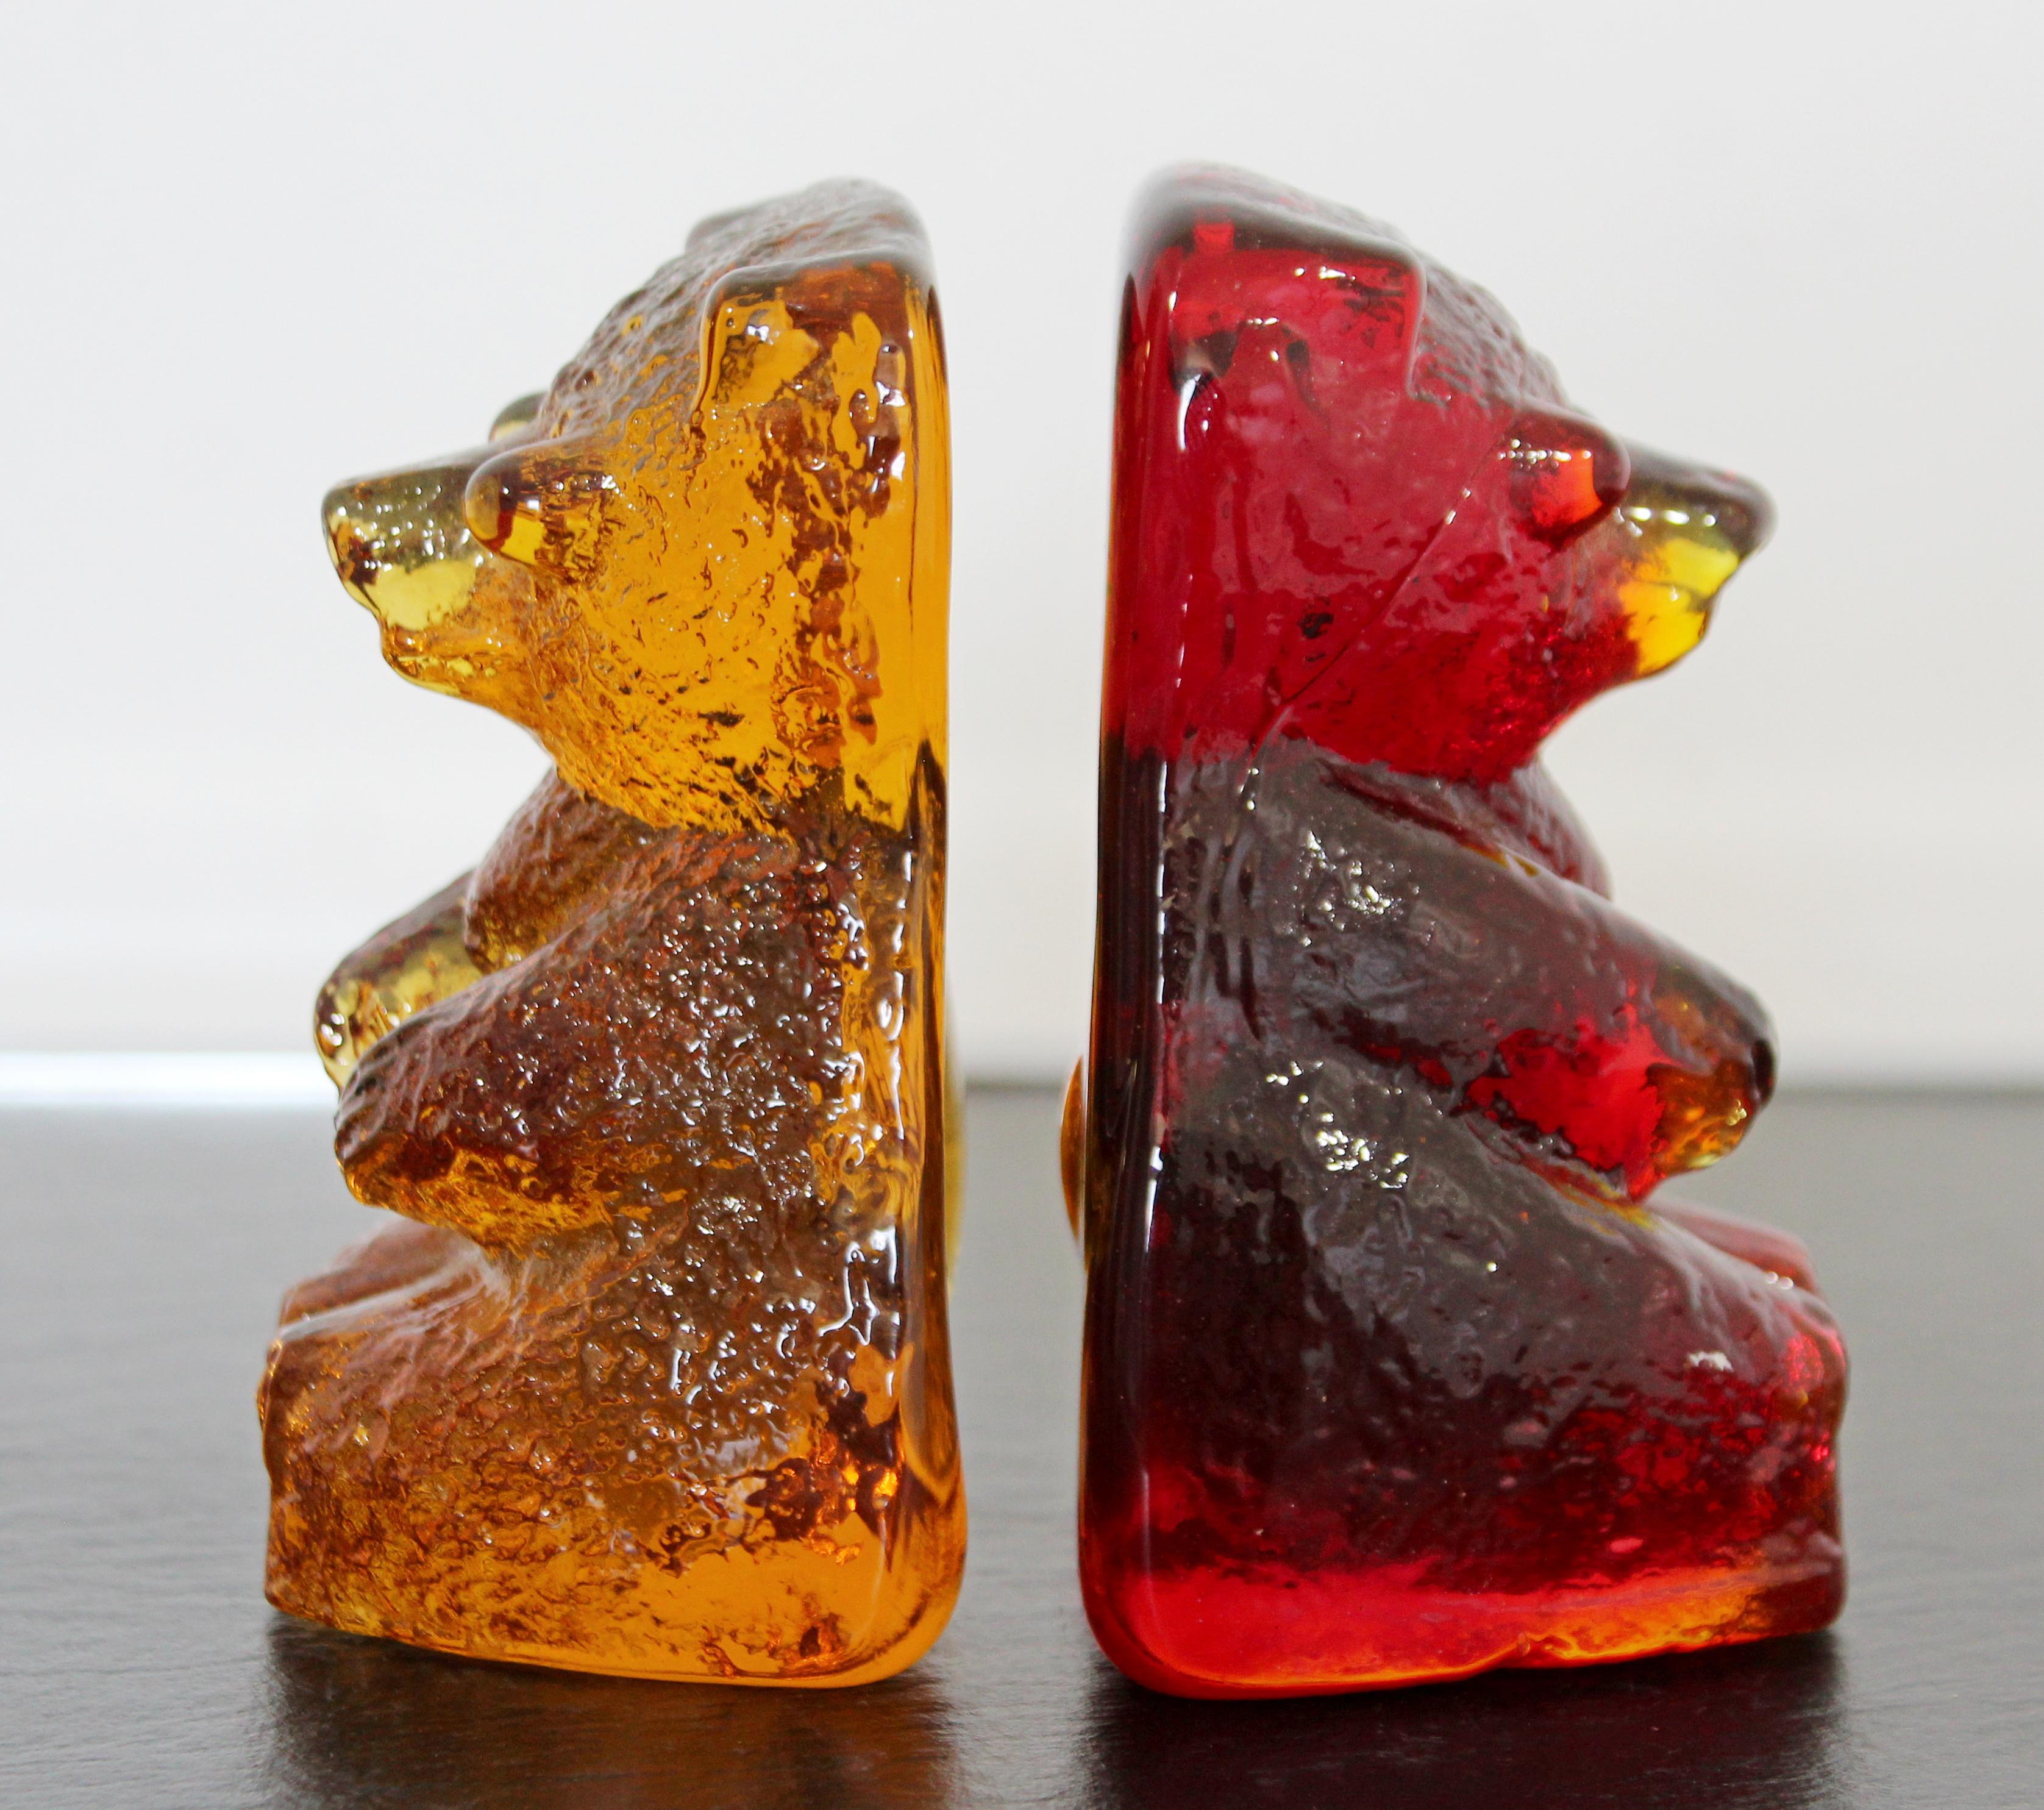 For your consideration is a fun pair of book ends, in the shape of a bears, made of yellow and red Blenko glass, circa 1970s. In excellent condition. The dimensions of each are 3.5